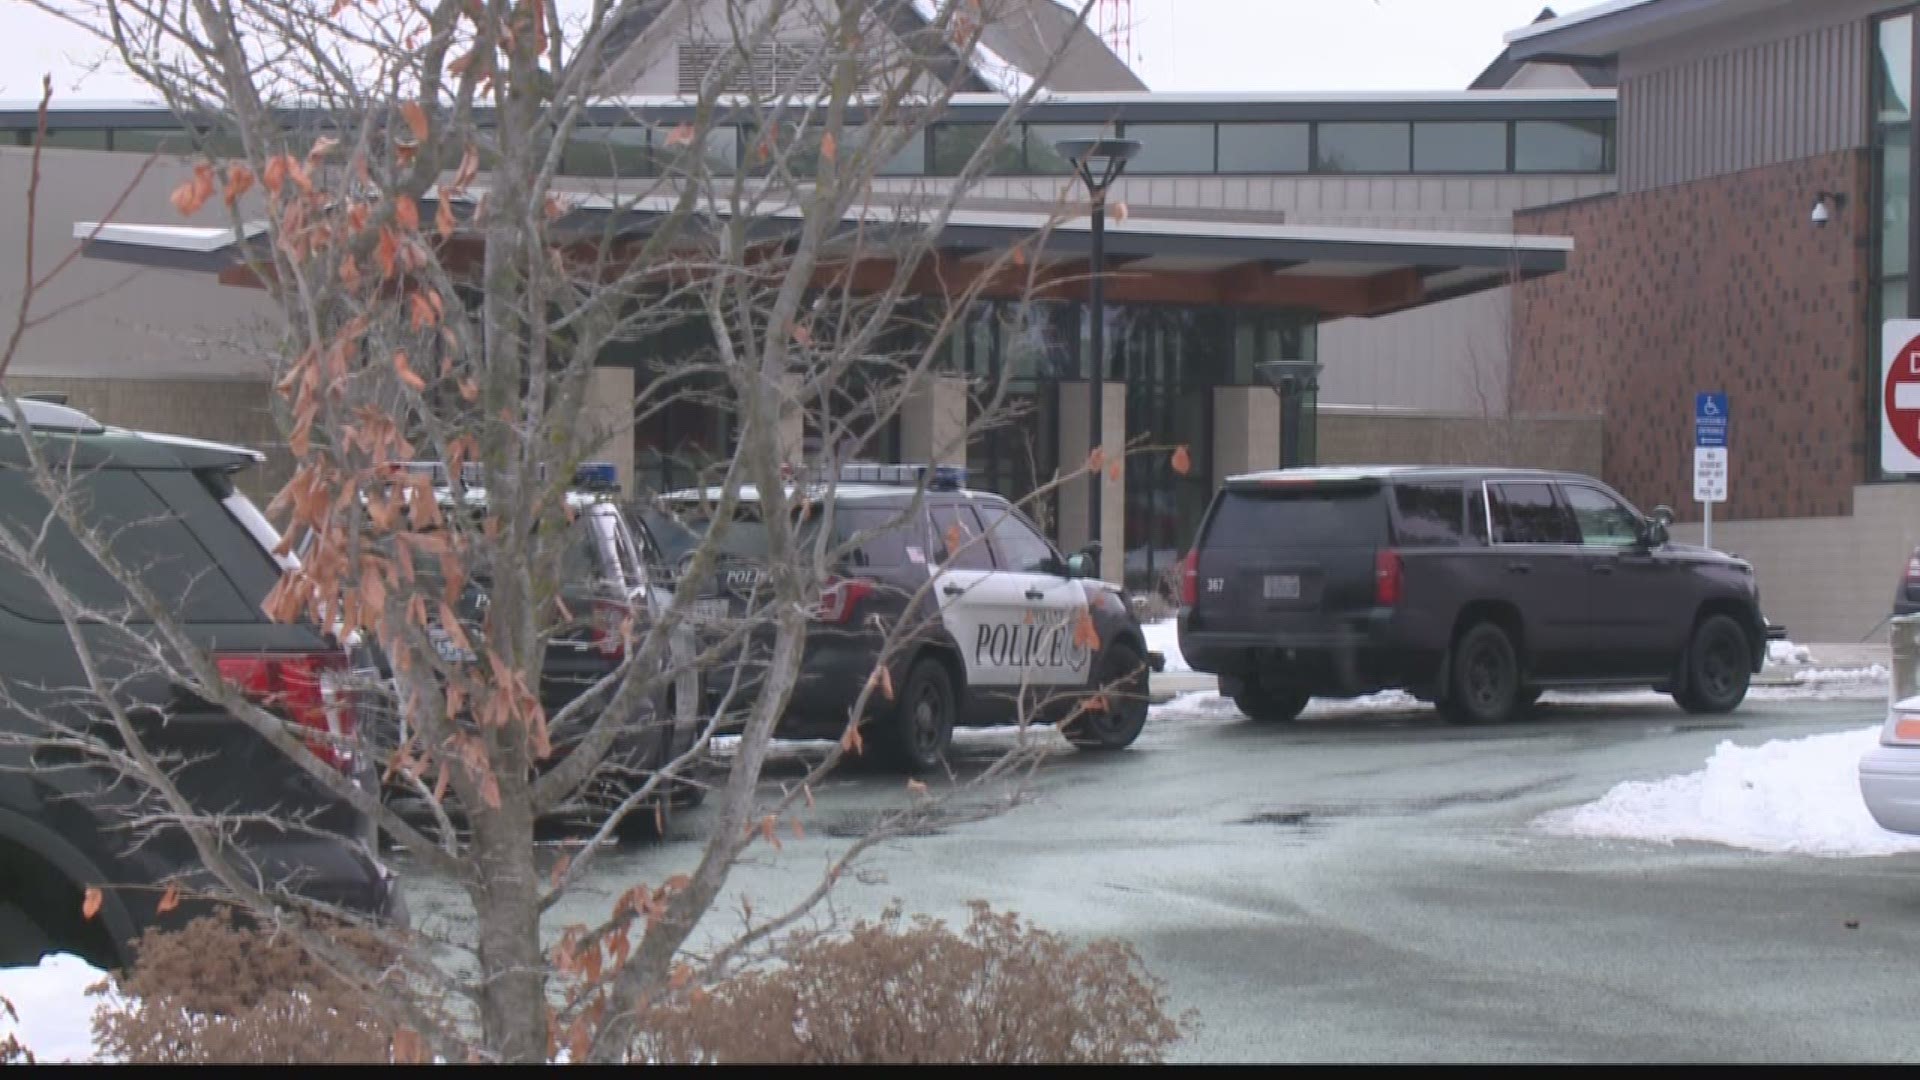 Two students were arrested for assault and another was arrested for malicious mischief and obstruction, according to a Spokane Public Schools spokesperson.